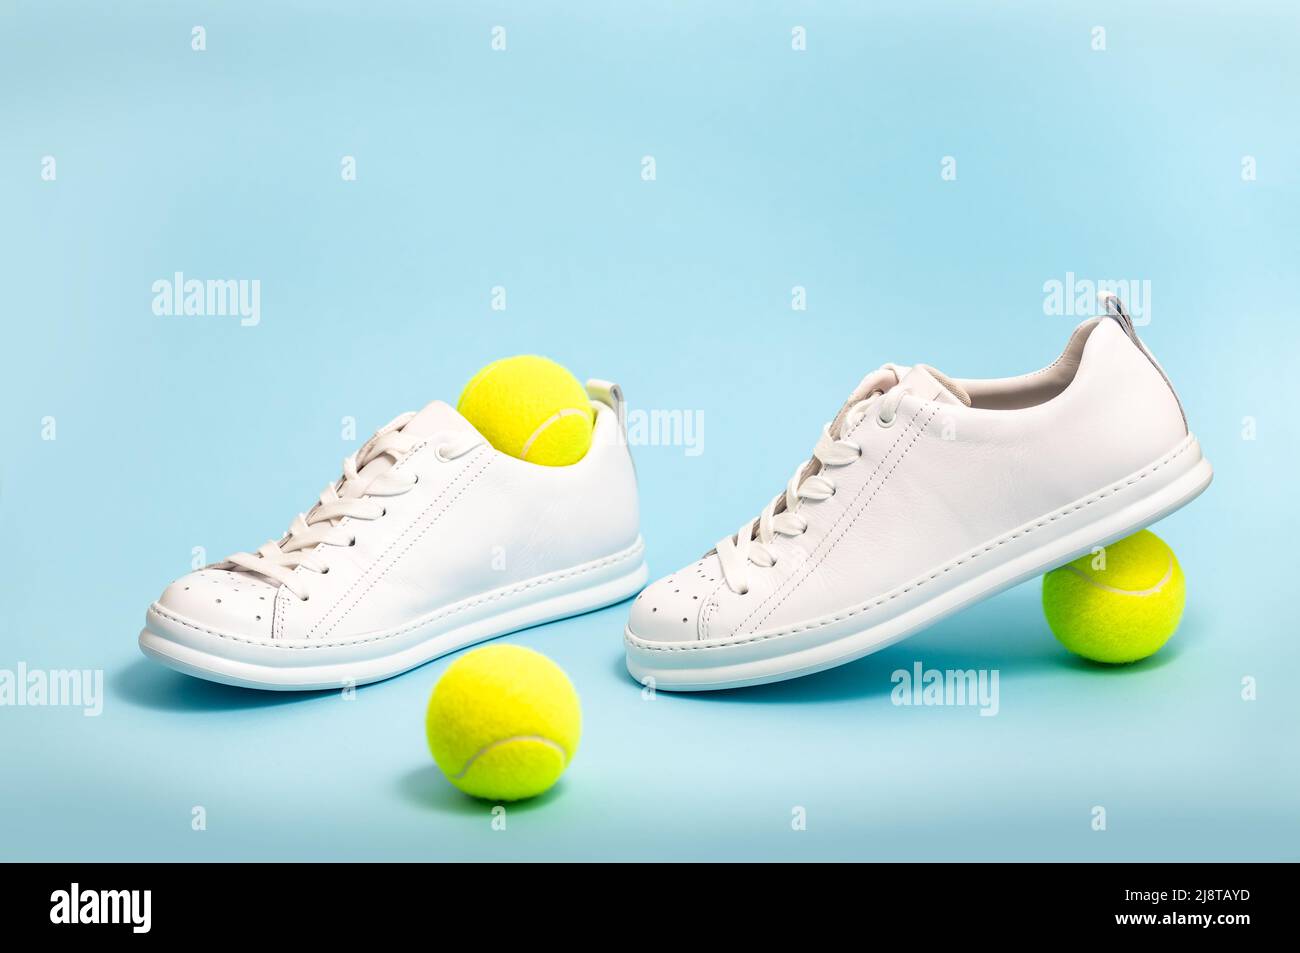 New unbranded fancy white tennis shoes on blue background New unbranded Sneakers or trainers on blue background. Men's sport footwear Stock Photo